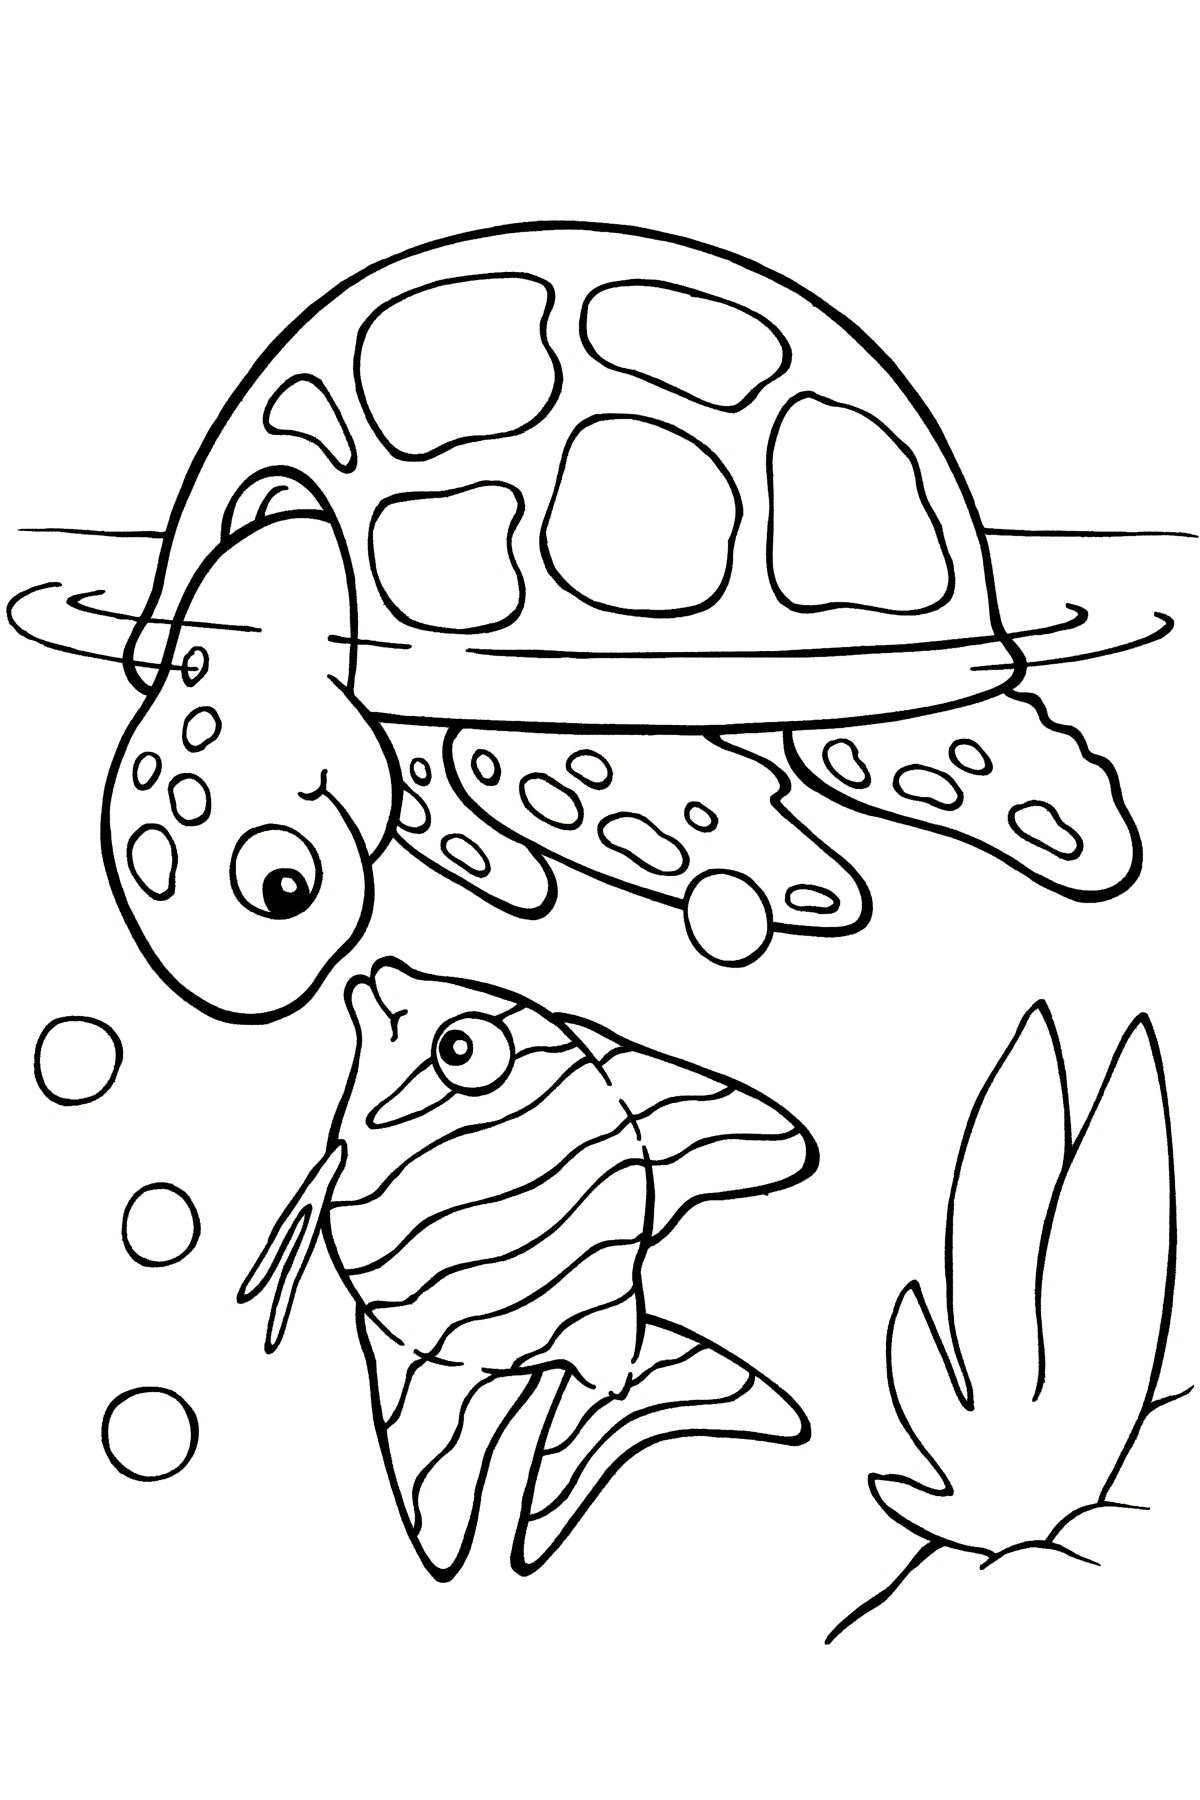 Ocean Coloring Book
 Free Coloring Pages Sea World 6673 Bestofcoloring